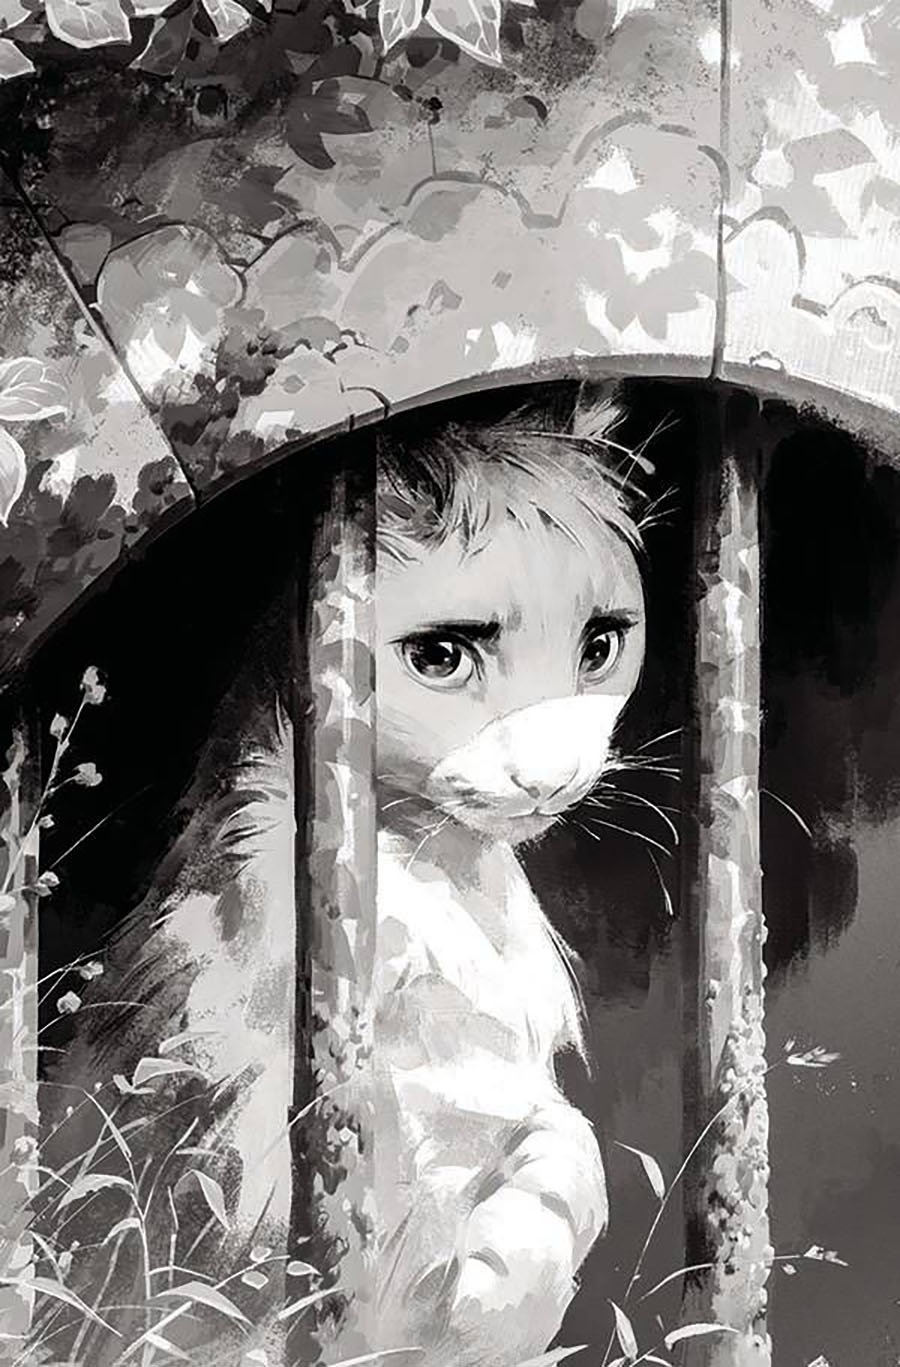 Animal Castle Vol 2 #1 Cover F Incentive Felix Delep Miss B Behind Bars Black & White Virgin Cover